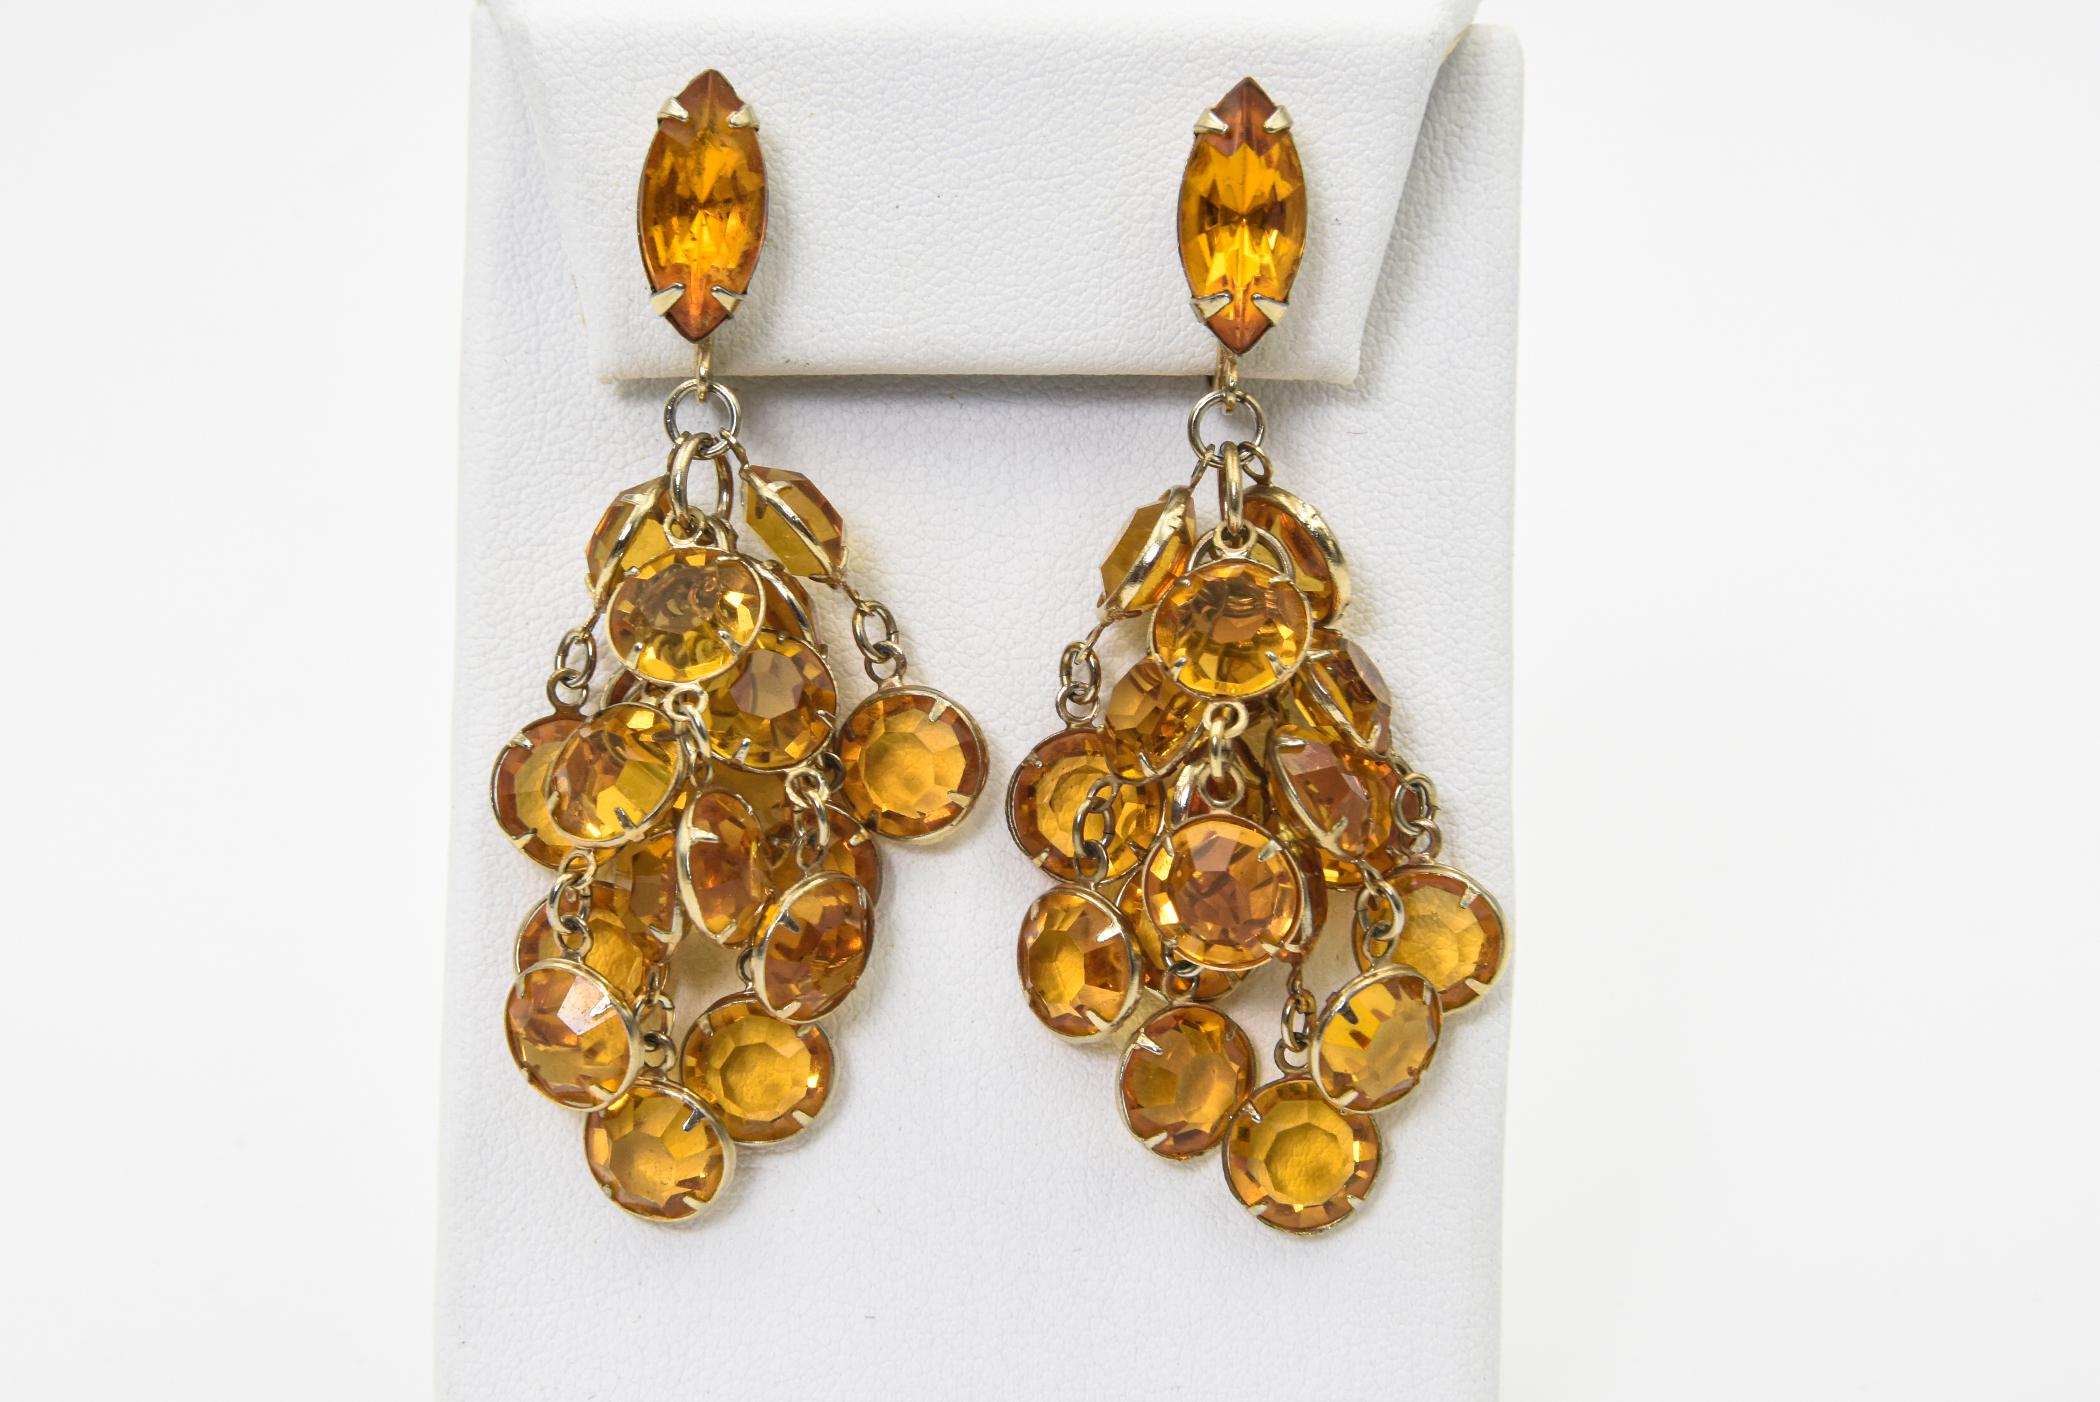 Dramatic fun earrings featuring a marquis citrine rhinestone on the ear and 9 tassels of bezel set citrine rhinestones. They have clip on backs and are not signed. The earrings measure 2.5